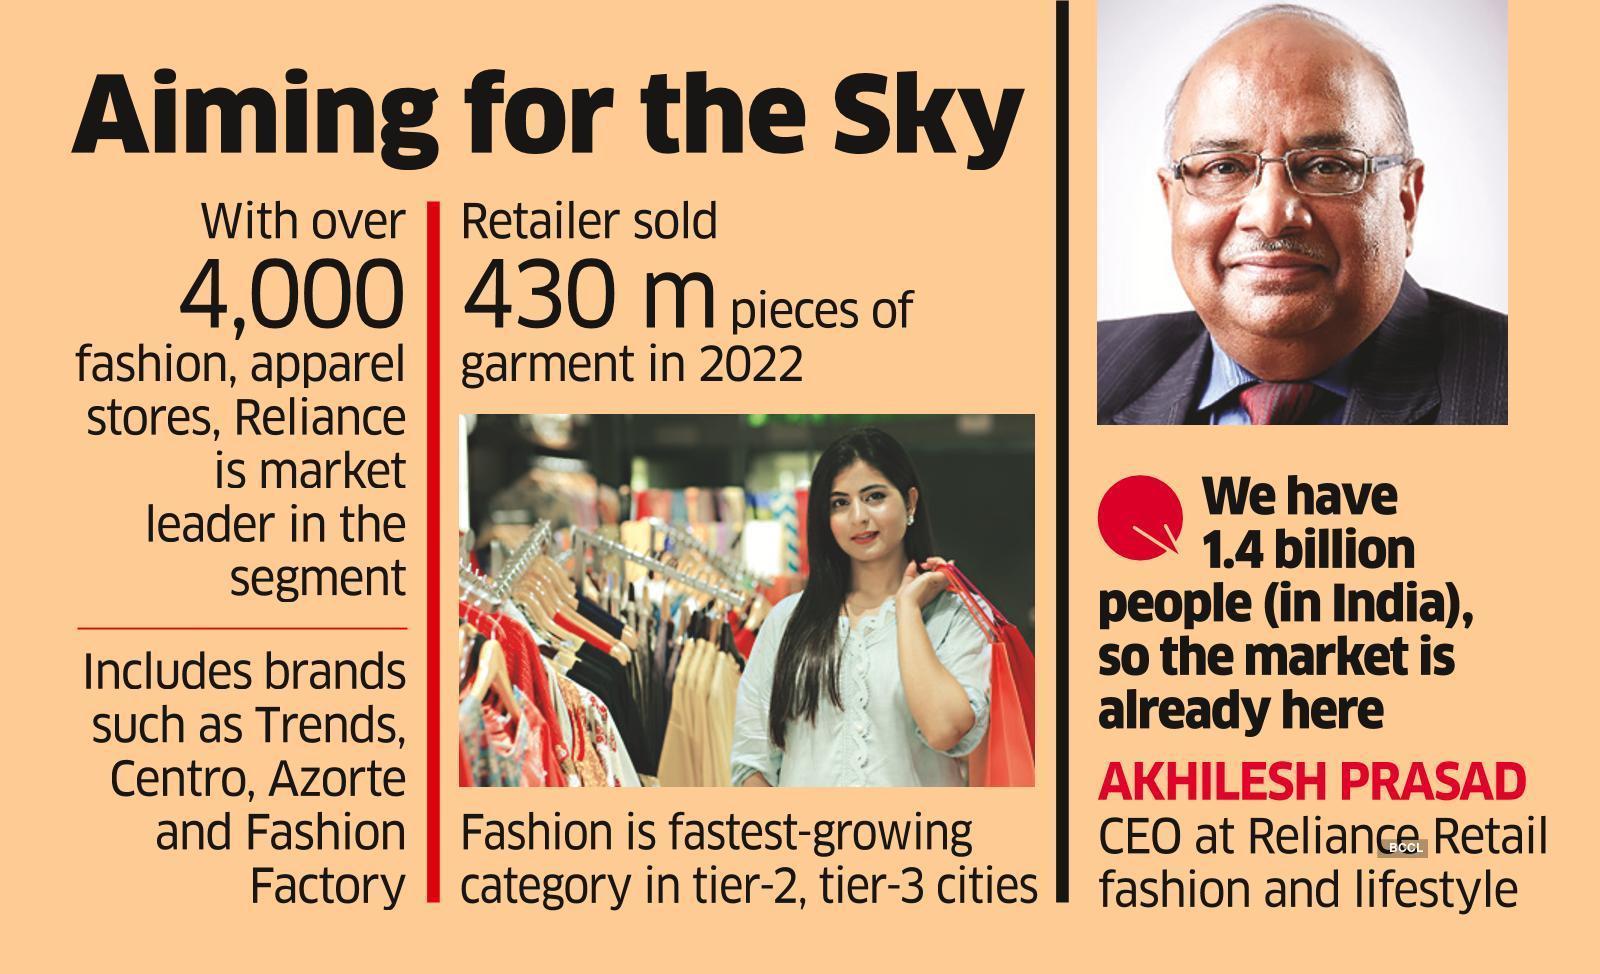 Reliance Retail aims to become world's biggest garment seller in 2 years